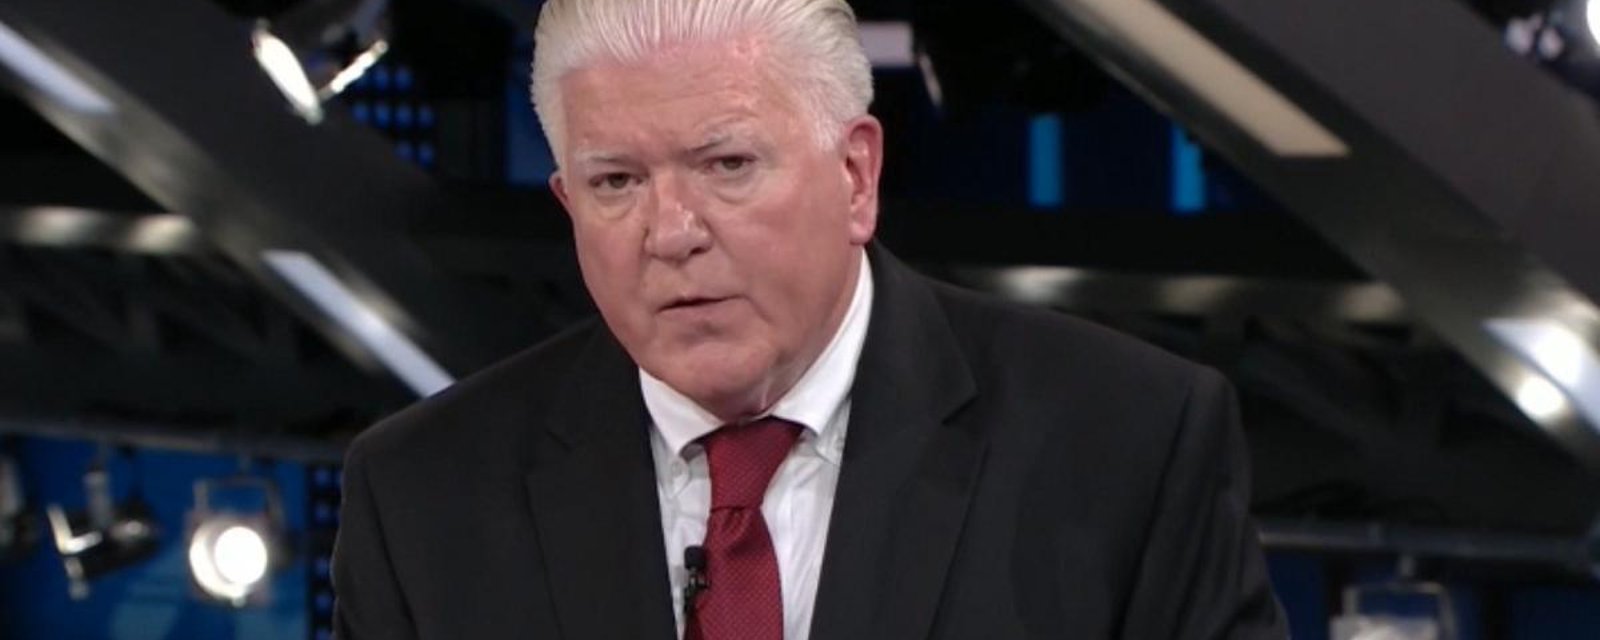 Brian Burke calls out the officiating in Game 4 between the Stars and Flames.